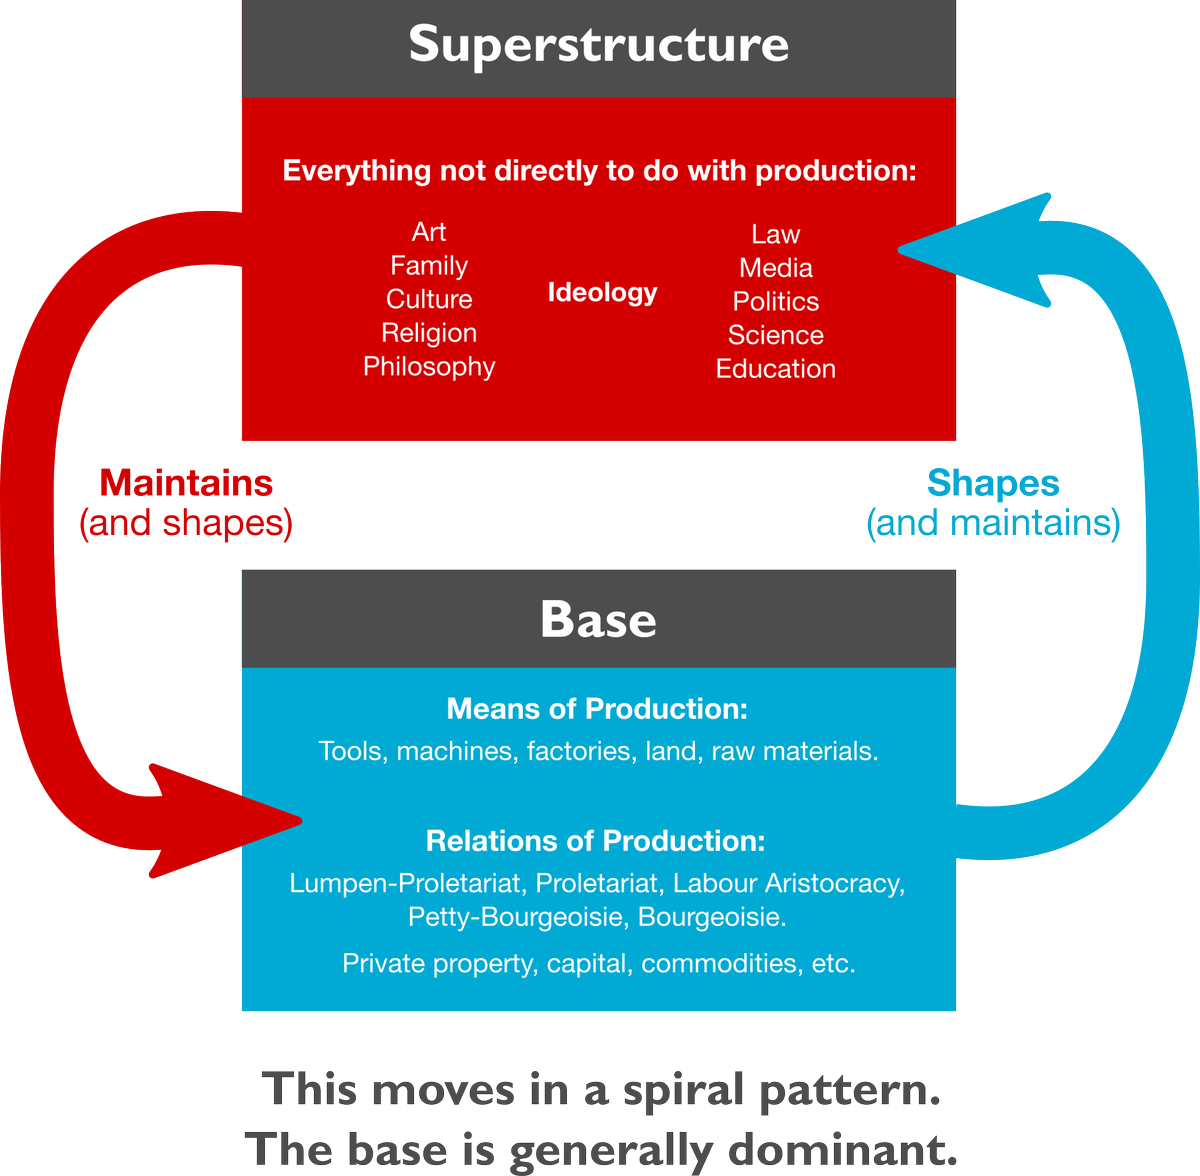 However, capitalism and the bourgeois would disagree. For some people, they would argue that the history of society is found through politics, religion, philosophy, and/or culture. Marxism disagrees with this argument with the "superstructure model" shown here.